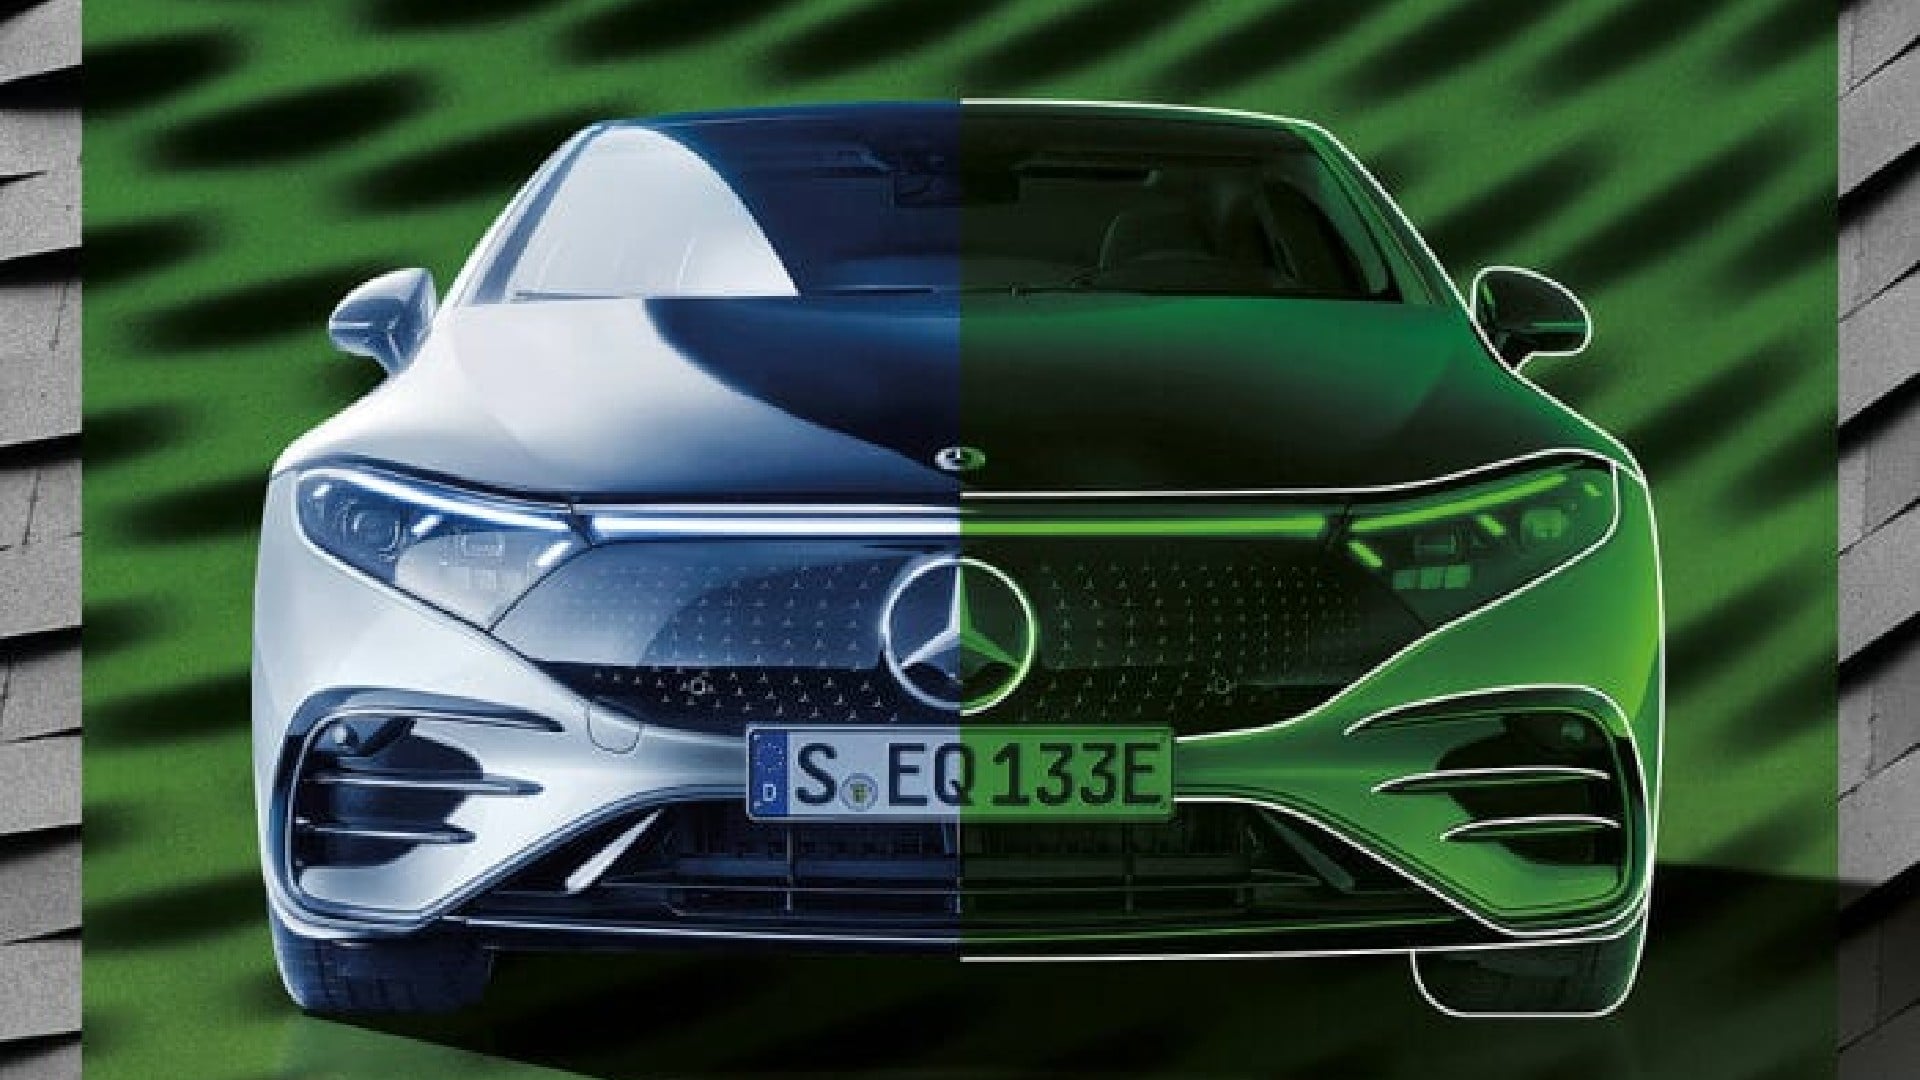 Mercedes-Benz to start using Green Steel “as early as 2025”